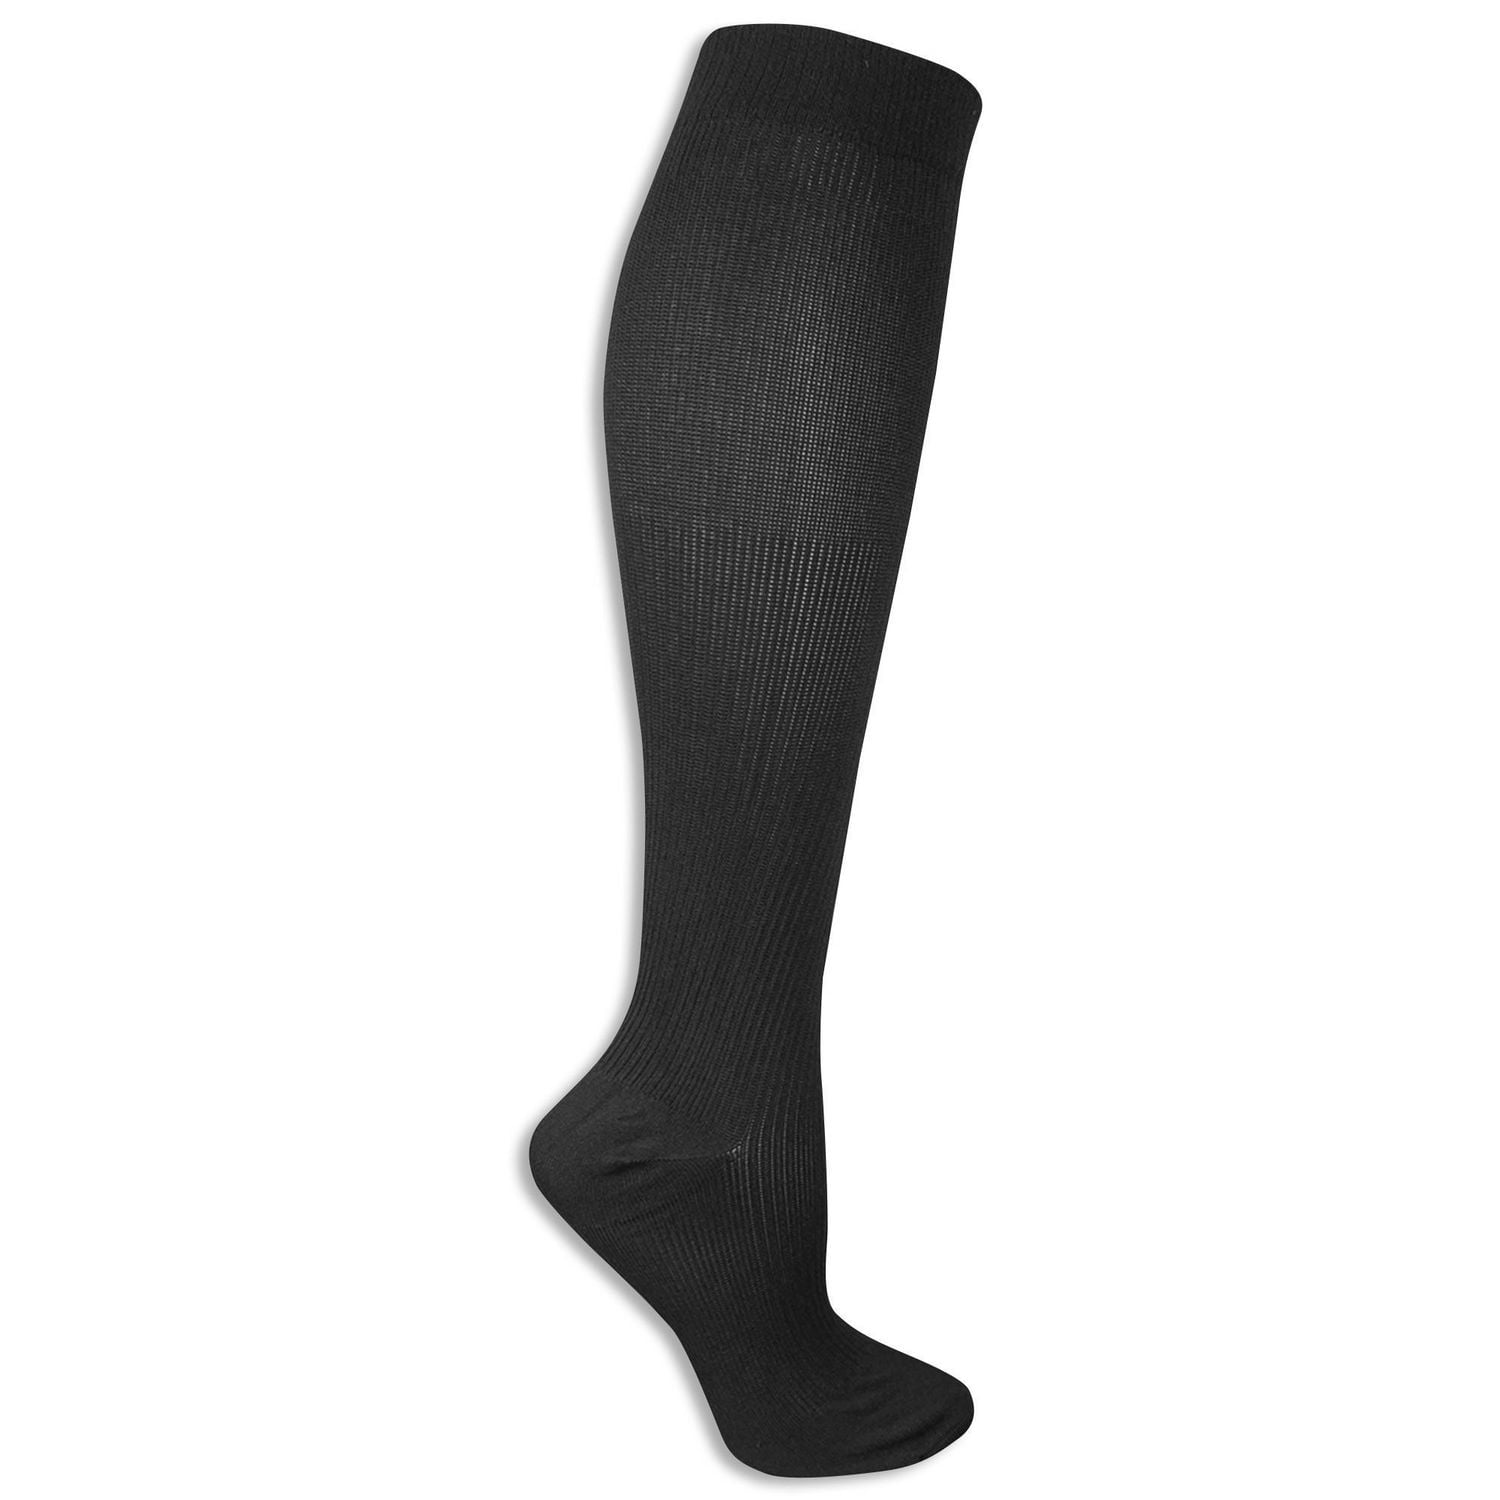 Scholl Softgrip with Ultima Compression Stockings C1 Below Knee Closed/Open  Toe